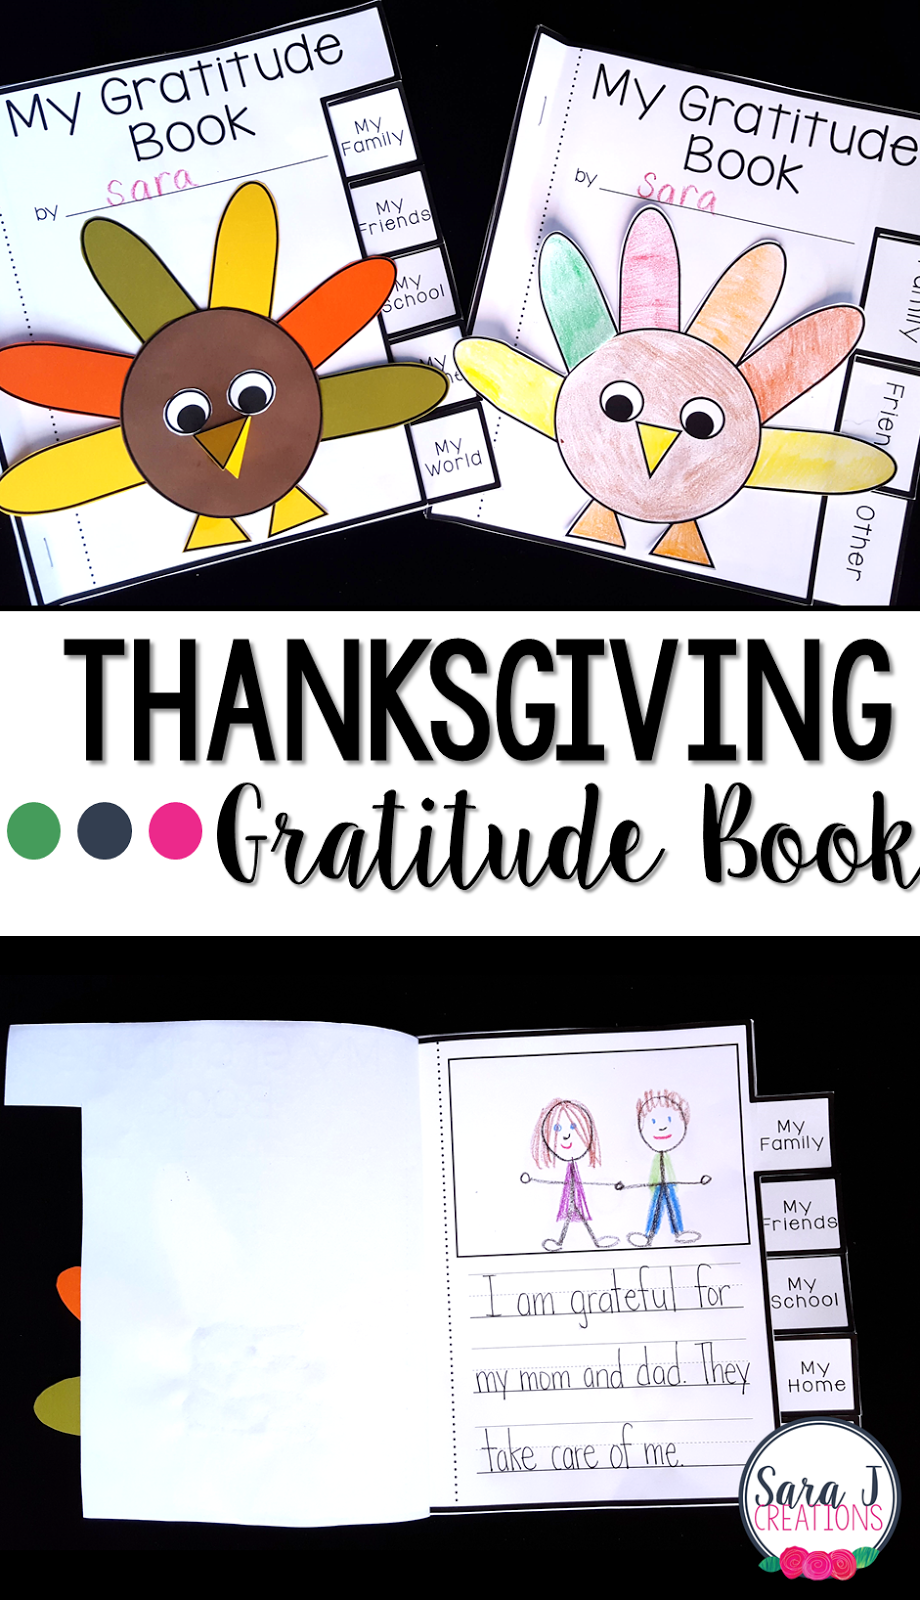 A Thanksgiving Gratitude book for kids to make!  Perfect activity to reflect on what you are thankful for this year.